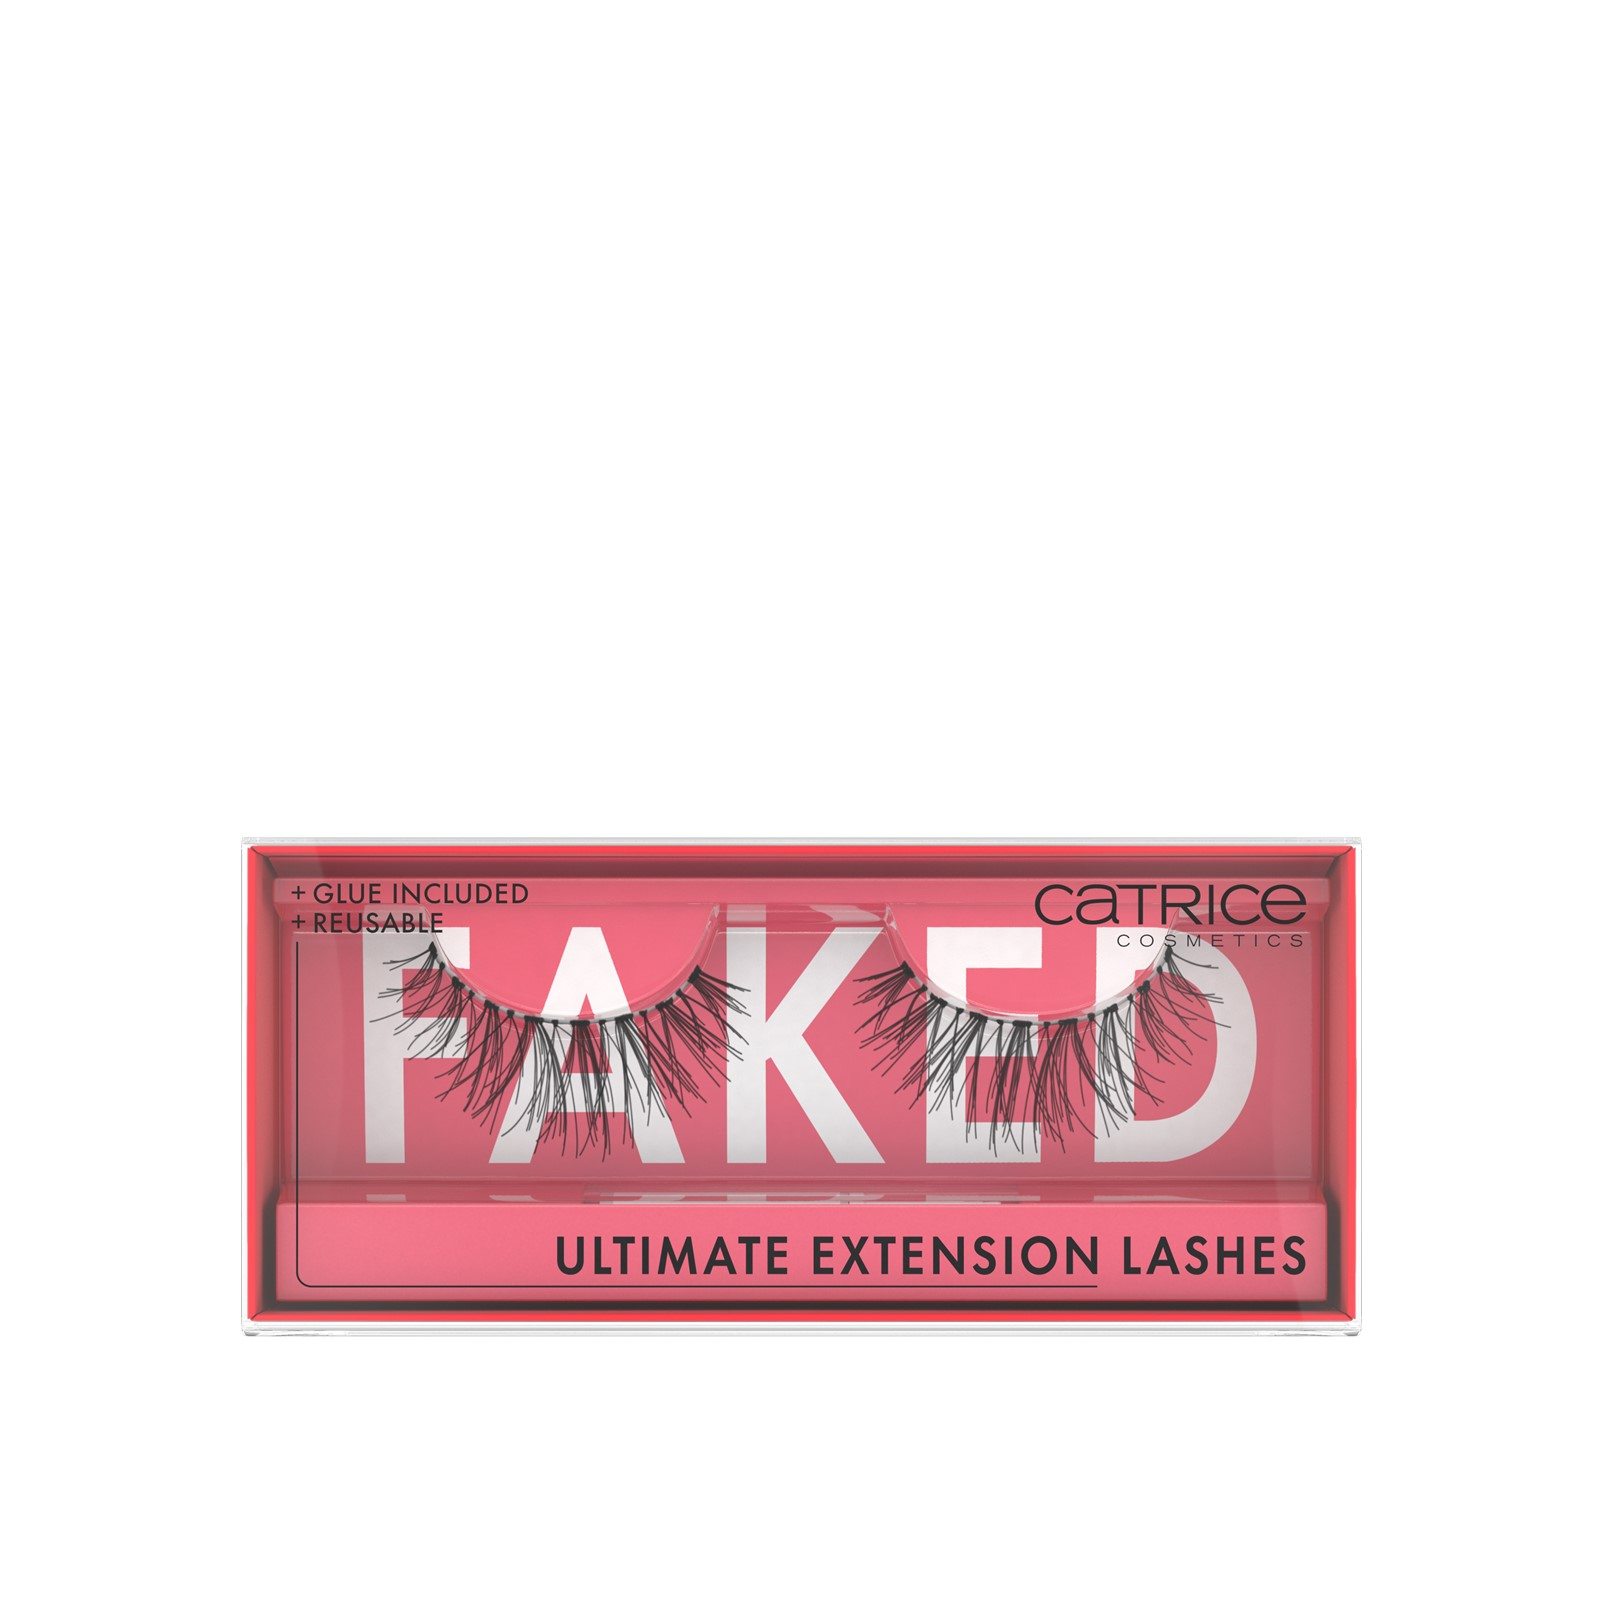 Buy Catrice Faked Ultimate Extension Lashes Pair USA x1 ·